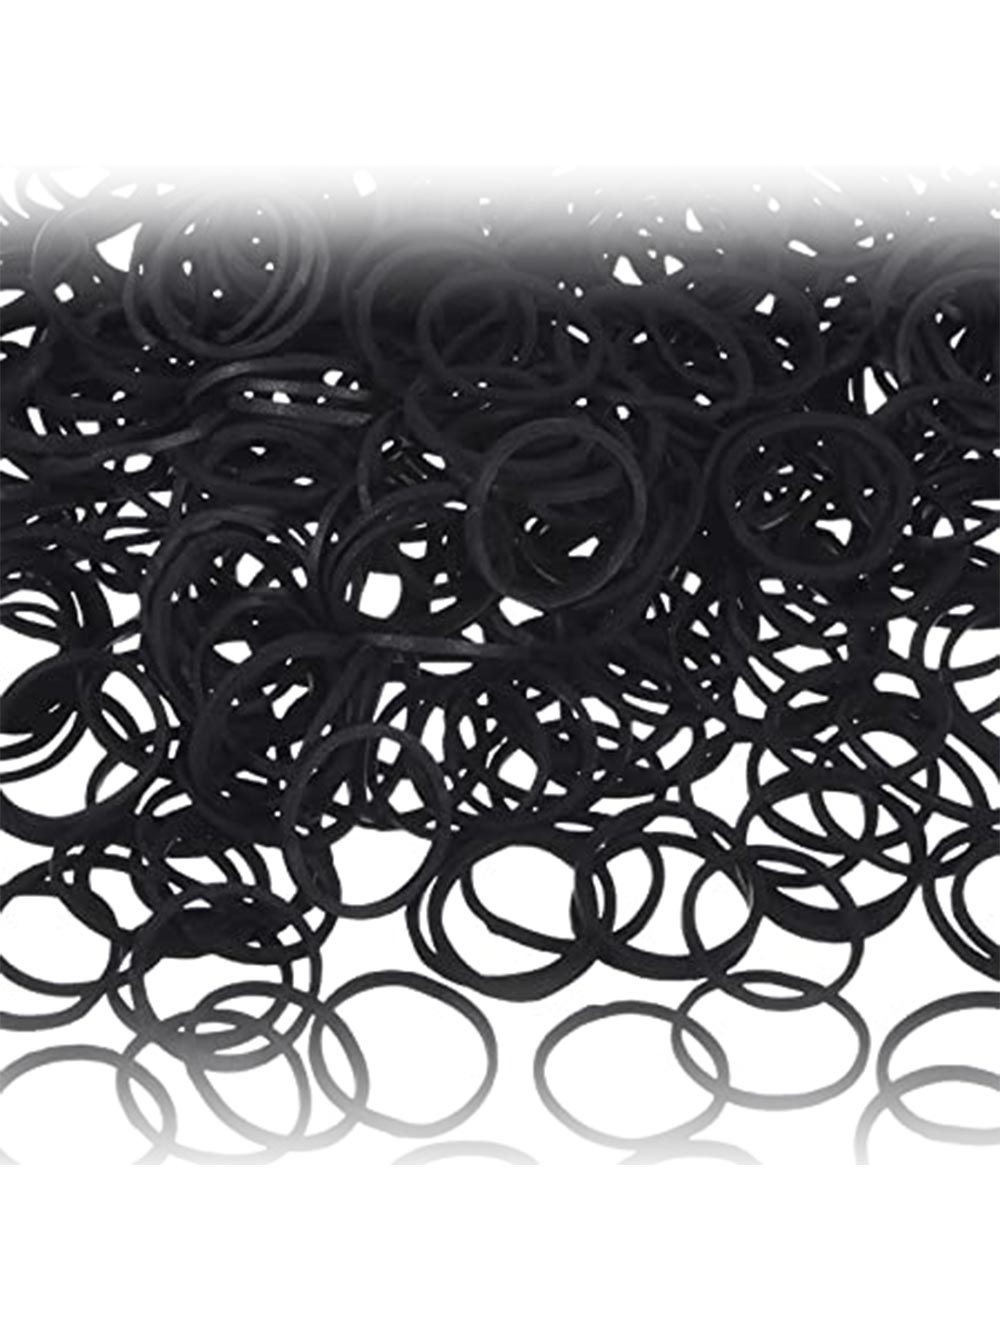 Black tiny rubber bands